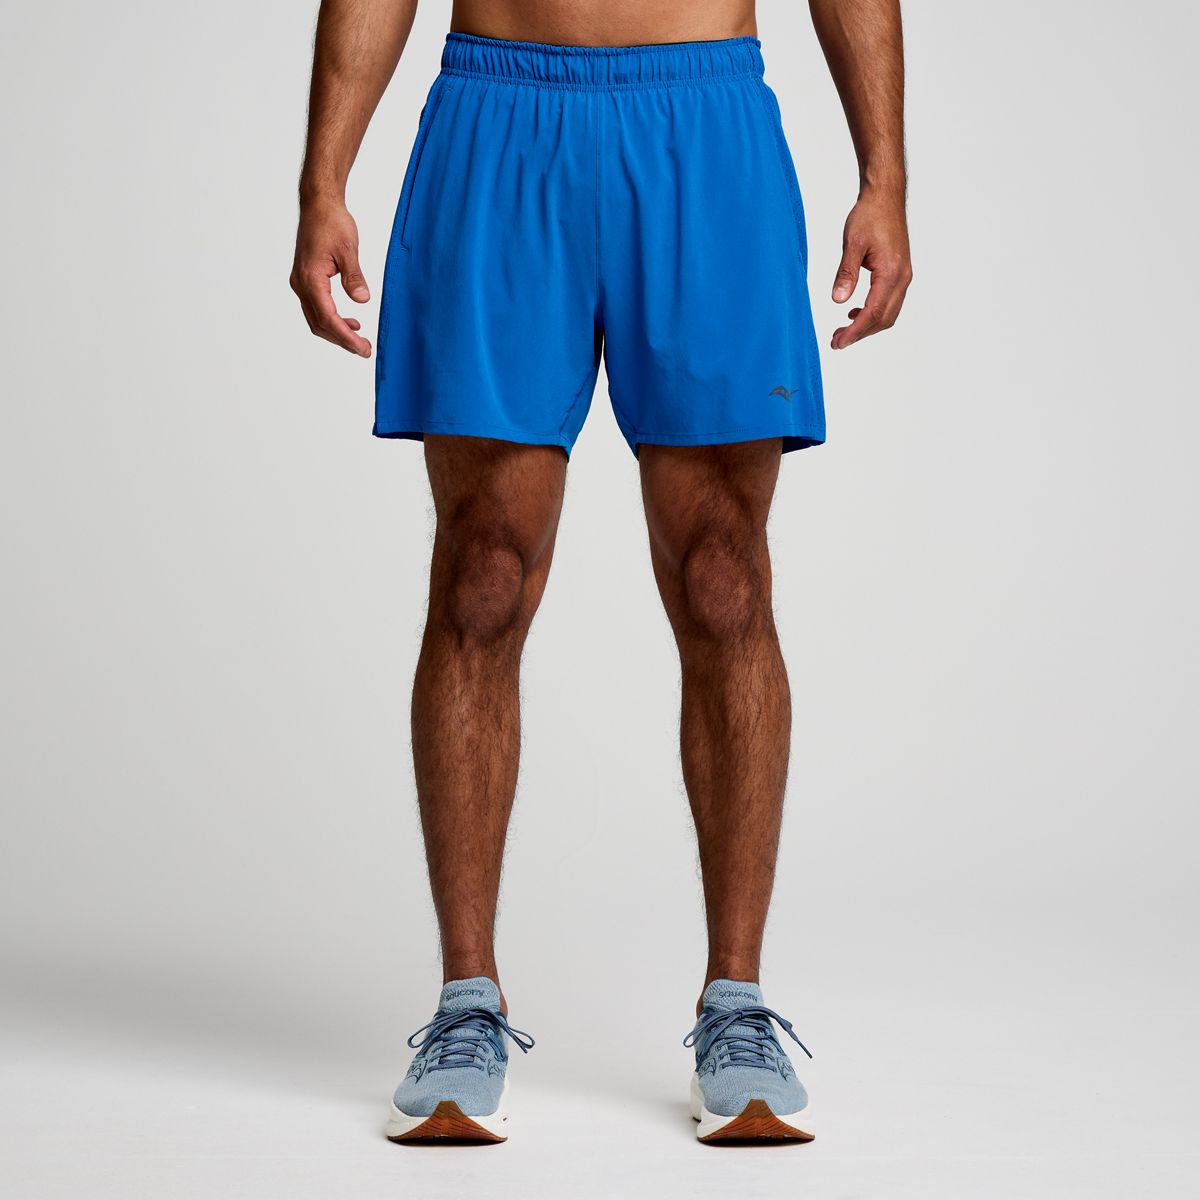 Men's Outpace 5 Short - View All